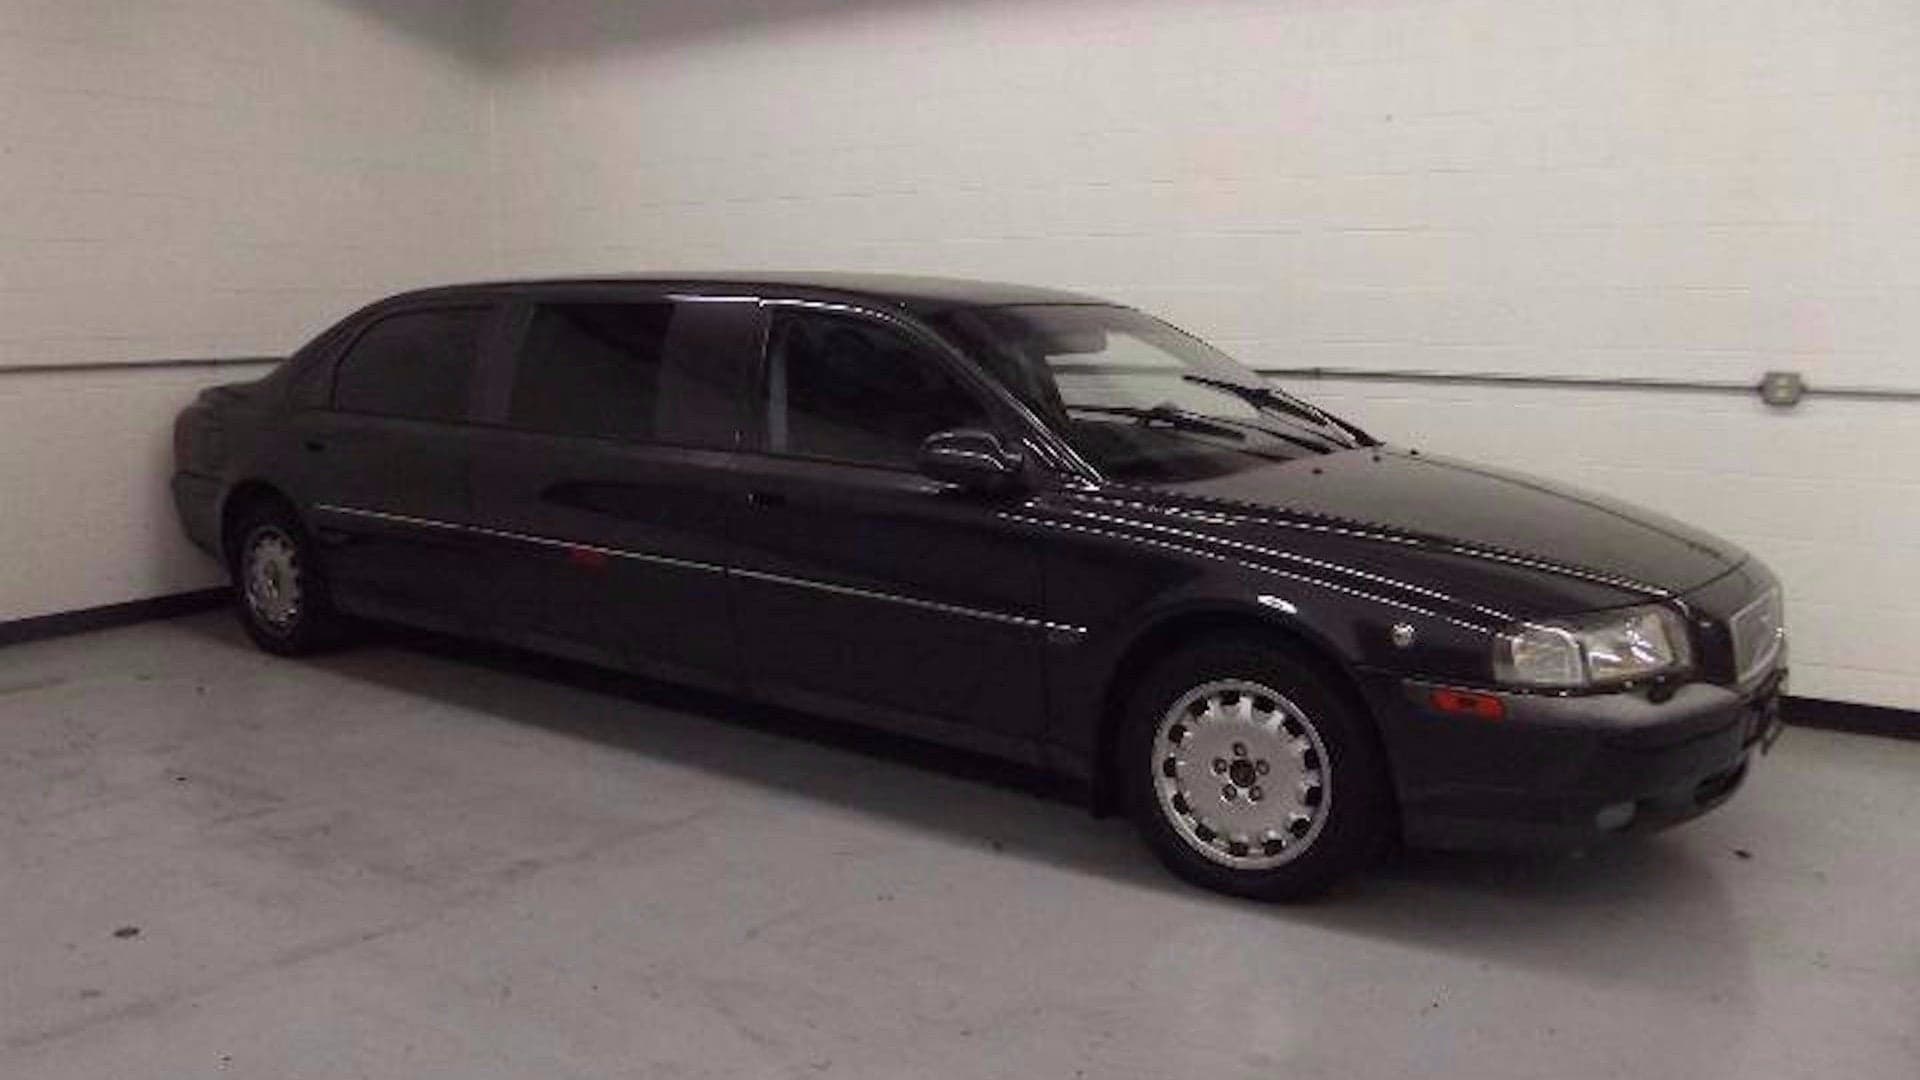 Just $4,000 Will Buy You This 2001 Volvo S80 Limousine Built for a Swedish Diplomat